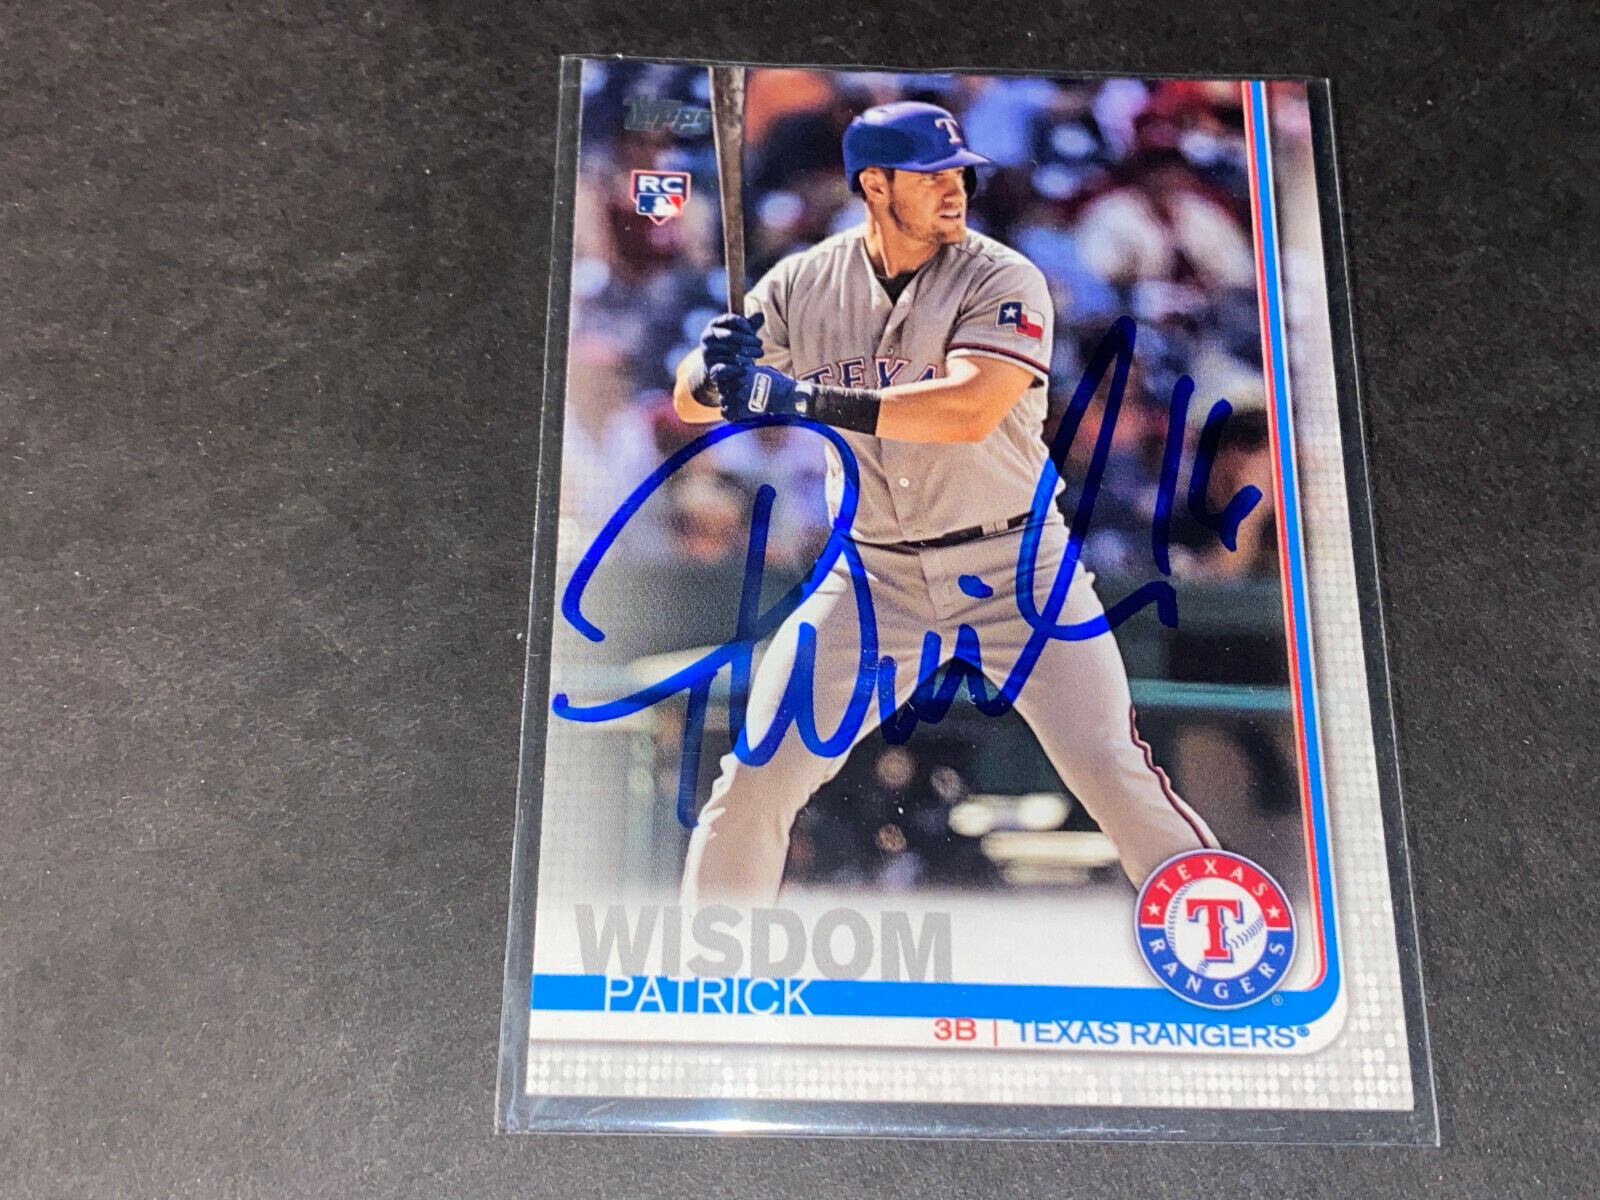 Patrick Wisdom Chicago Cubs Rangers Auto Signed 2019 Topps Card